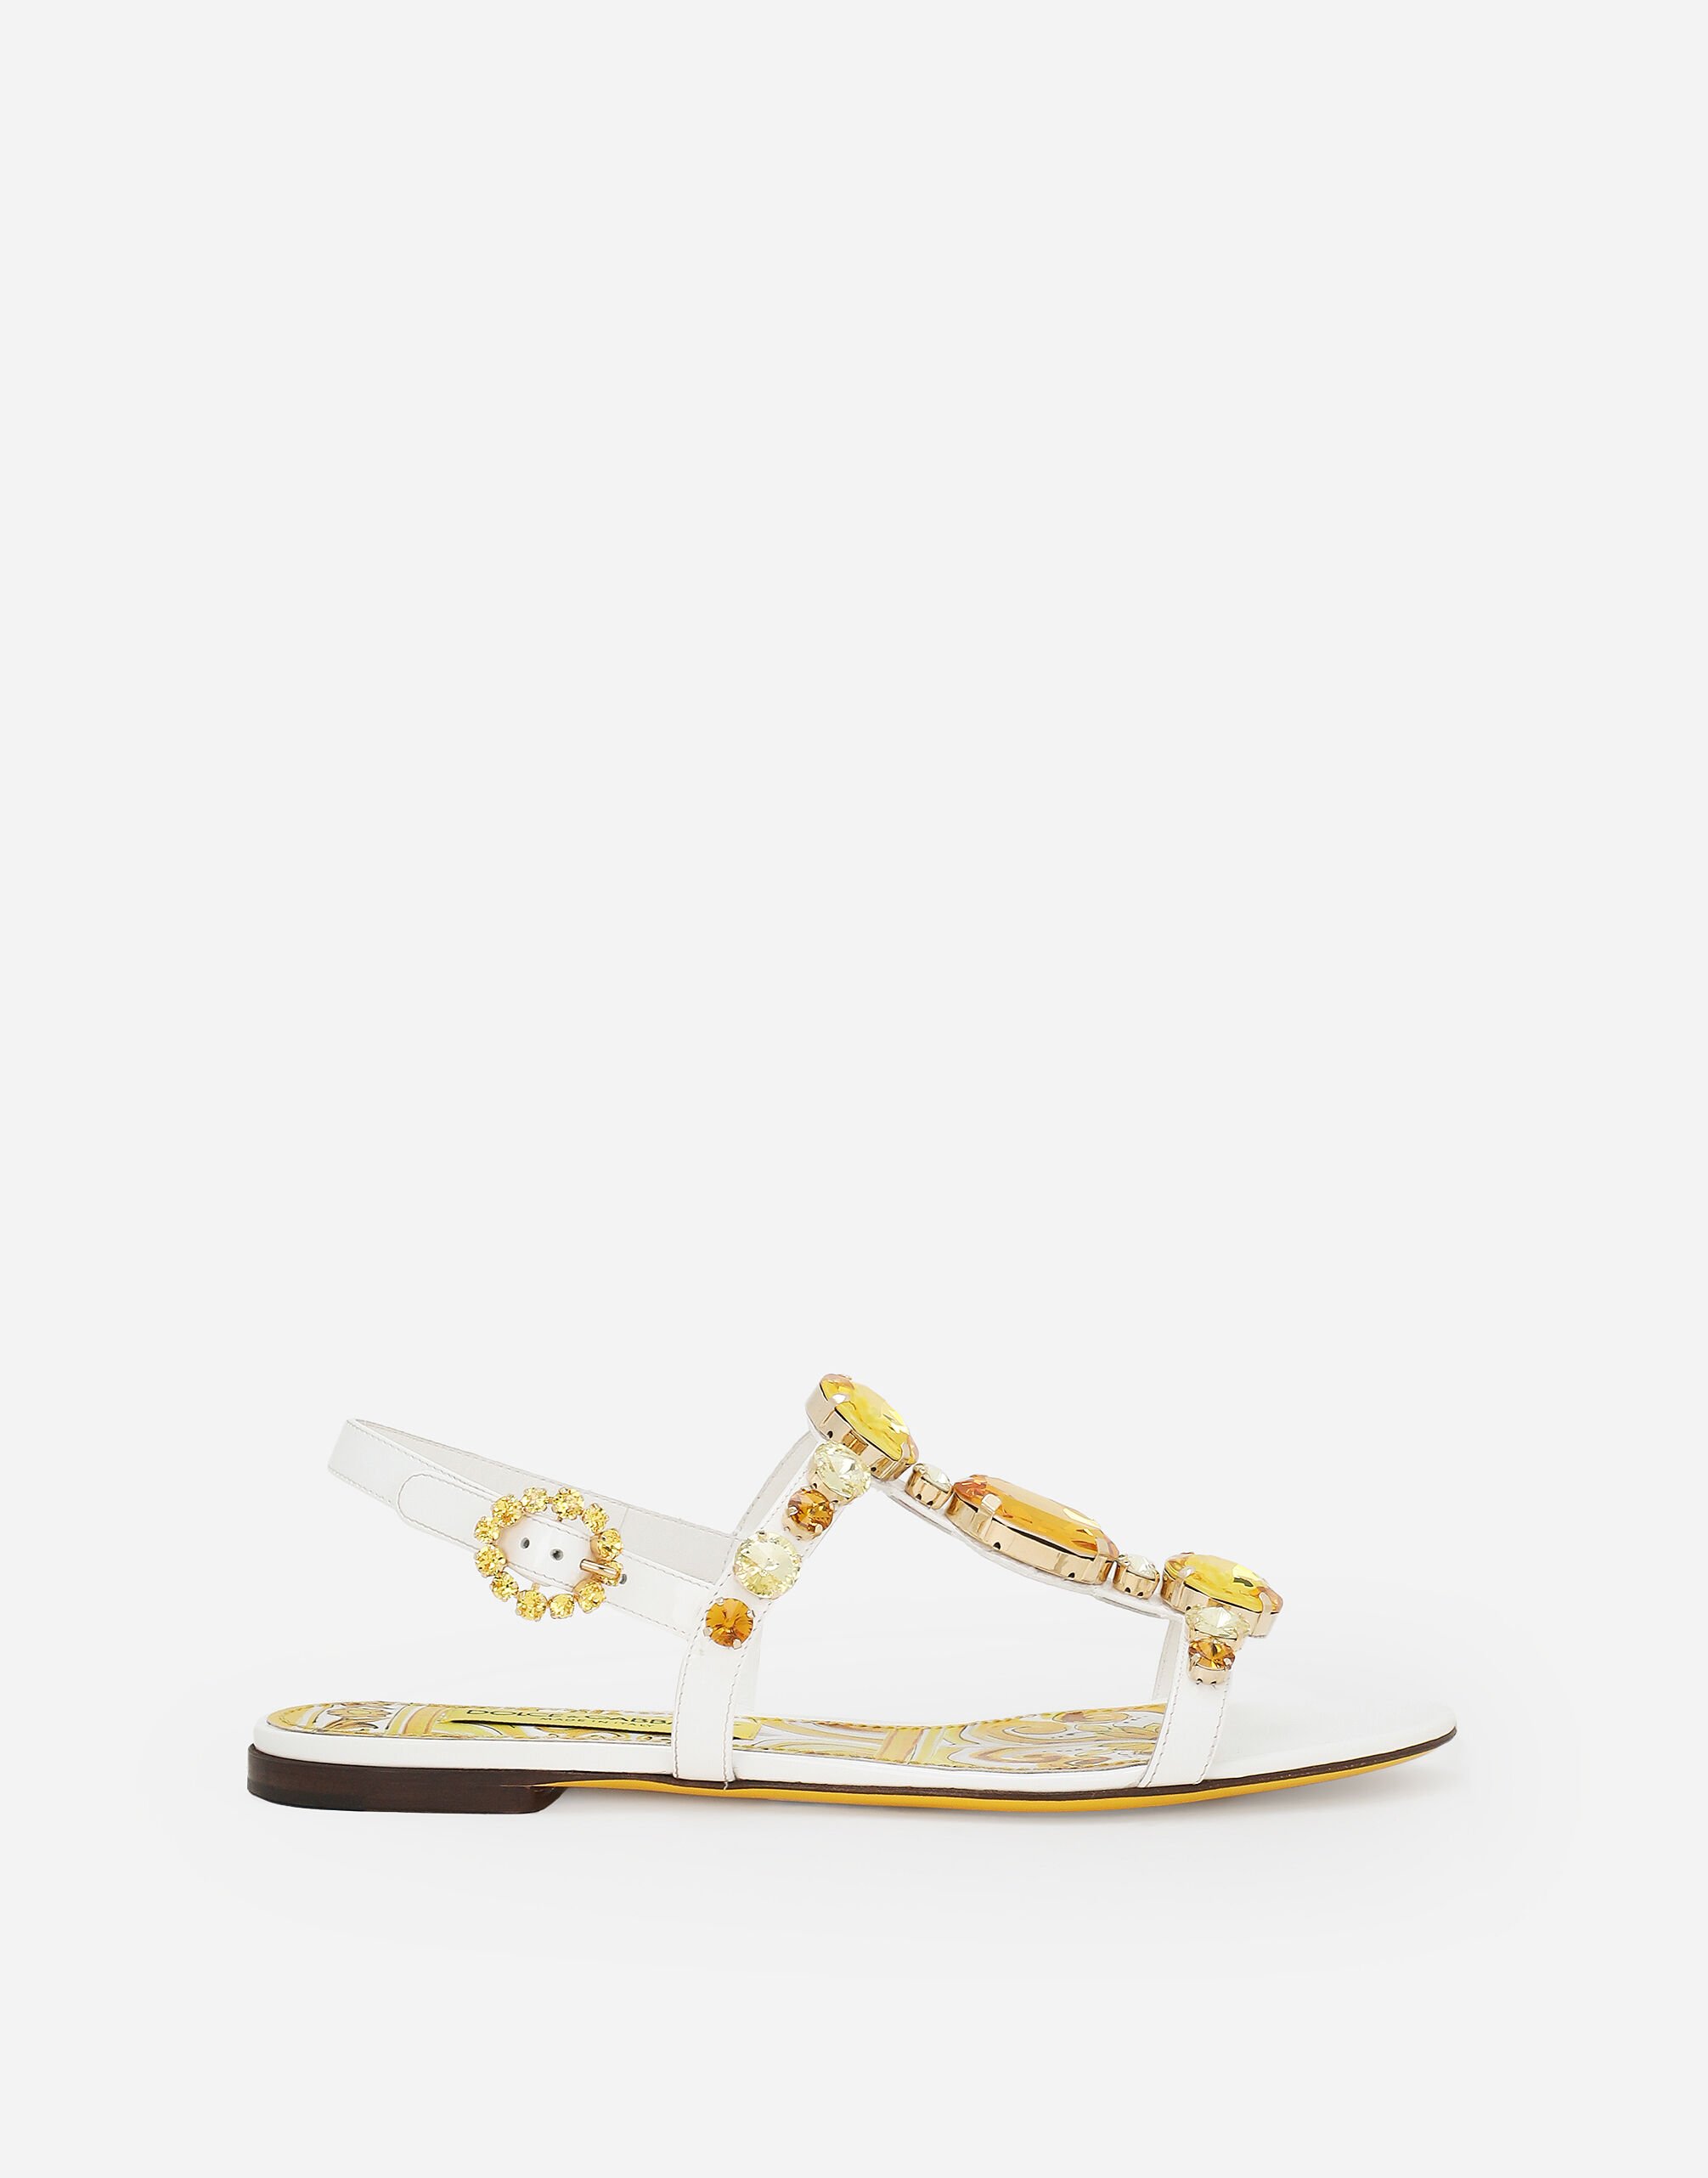 Dolce & Gabbana Patent leather sandals with stone embellishment Yellow BB6003AW050